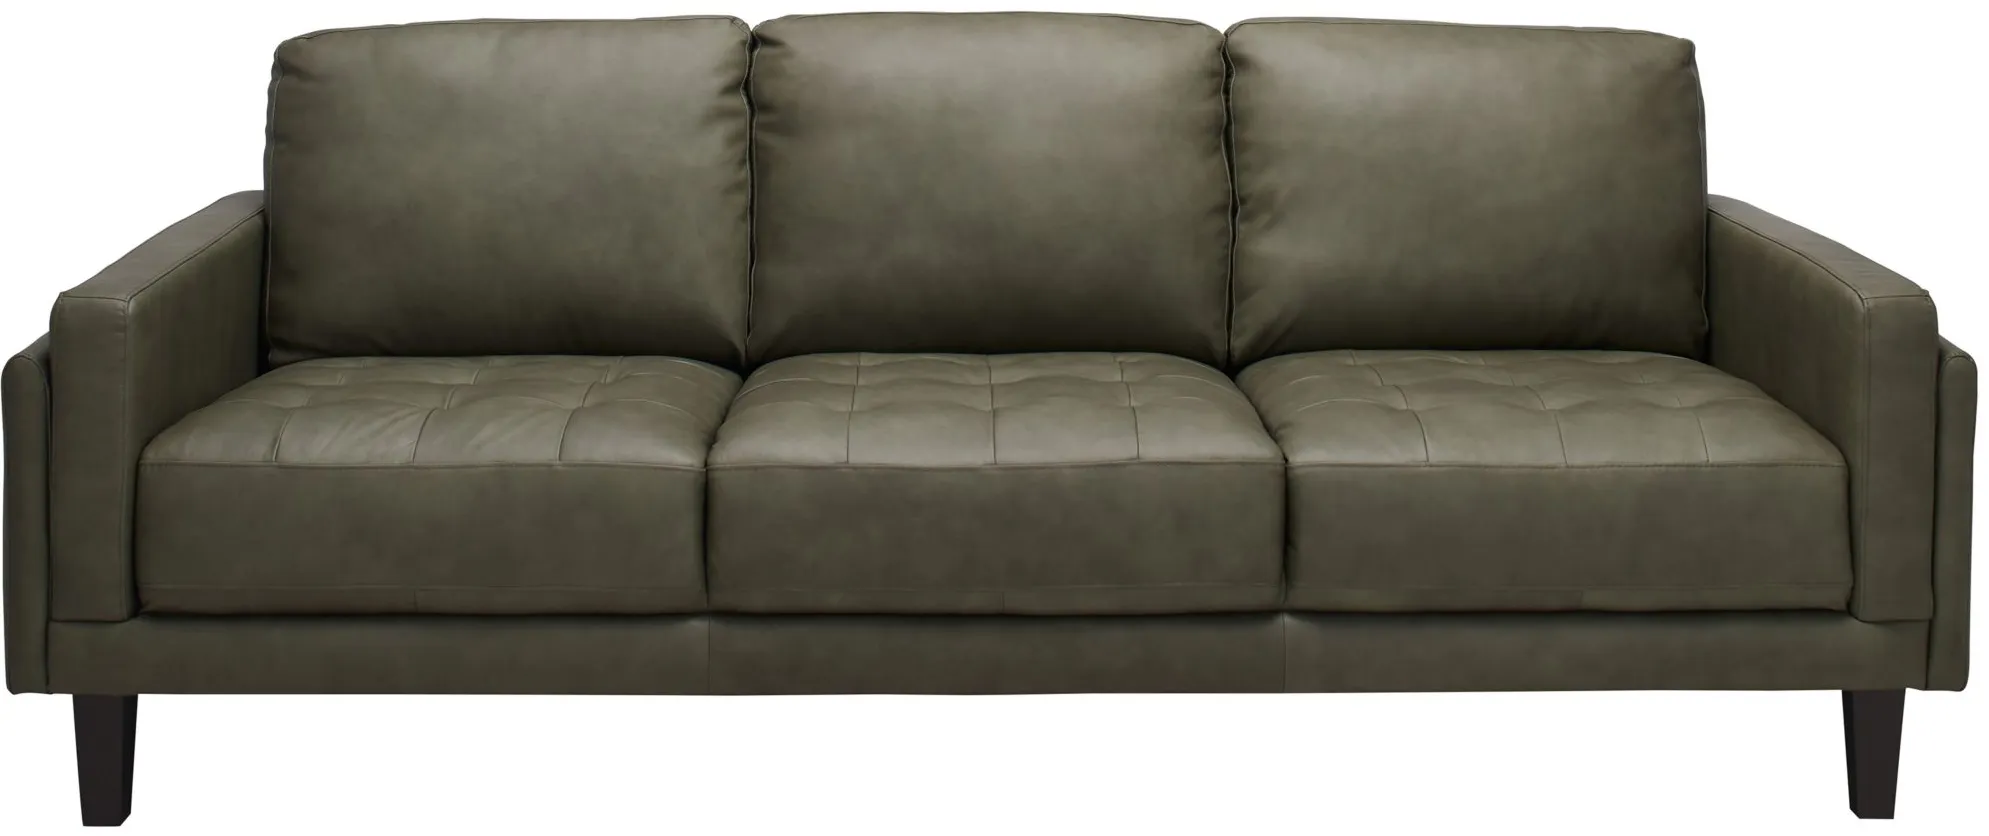 Hunter Sofa in Green by Chateau D'Ax